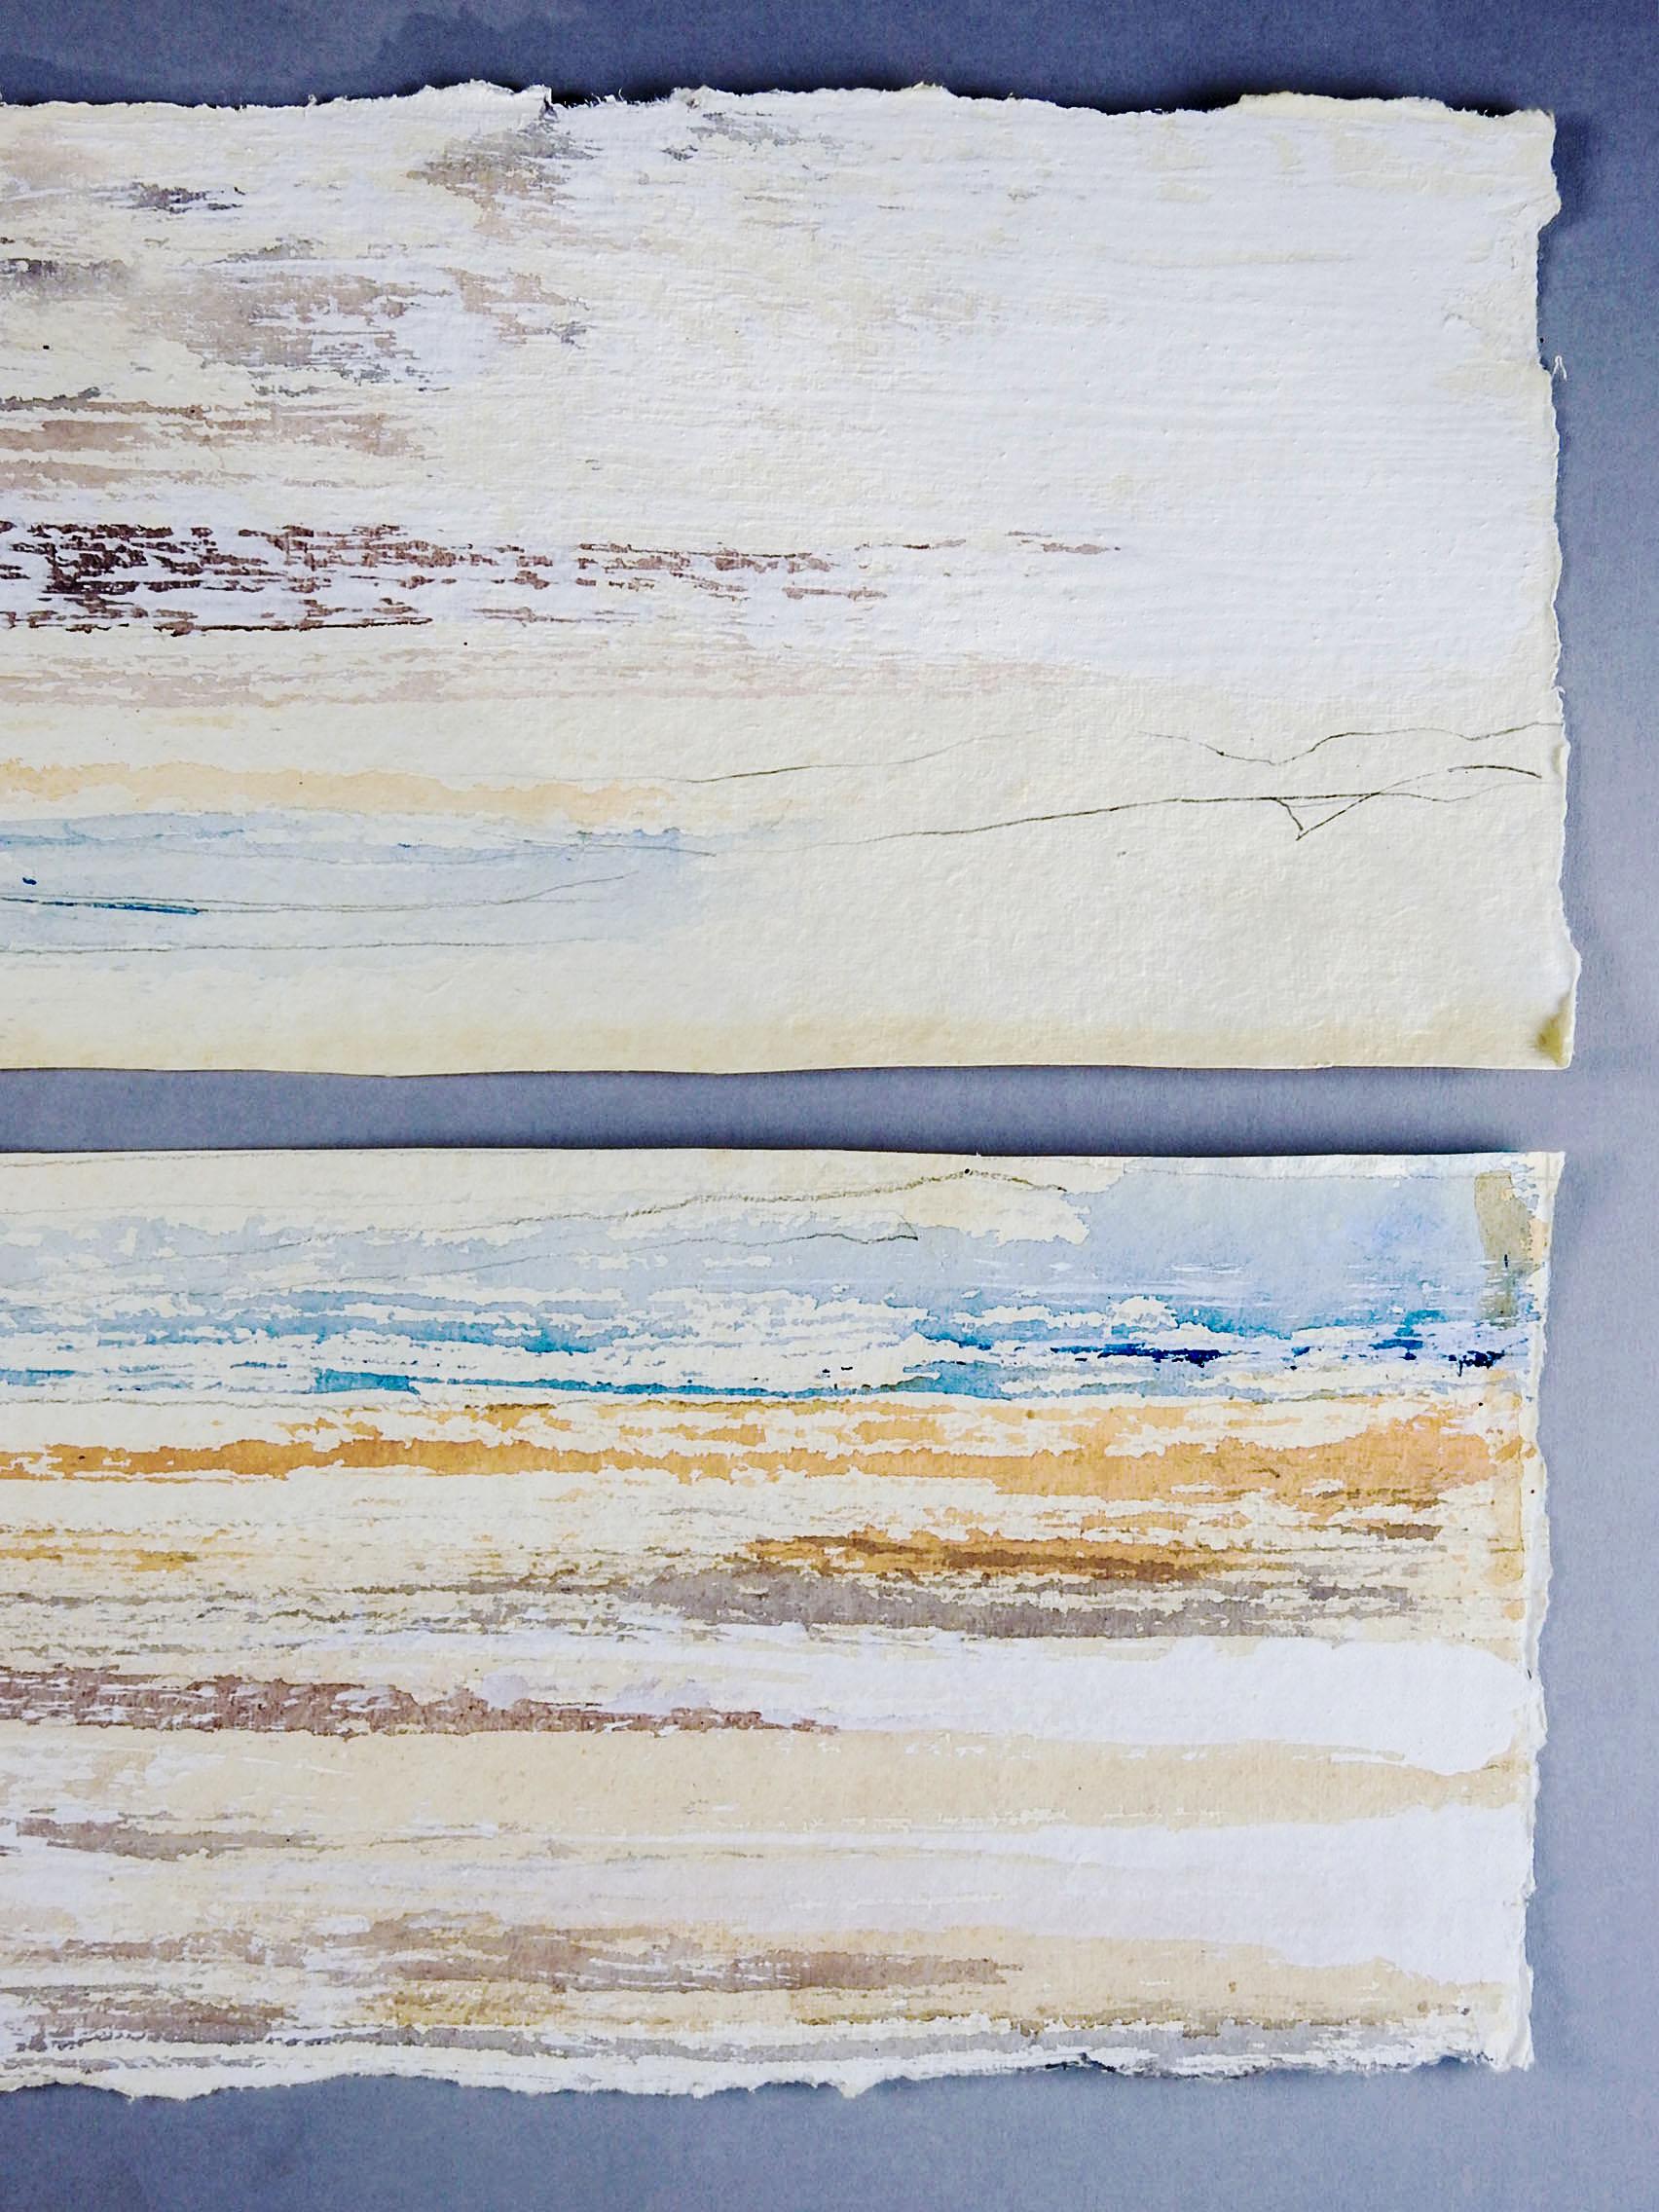 Long-format abstract in soft neutrals diptych by George Turner (1943-2014) using gouache and watercolor on heavy watercolor paper. Unframed. Unsigned, artist stamp on verso, from the artist's estate. Each piece is 30